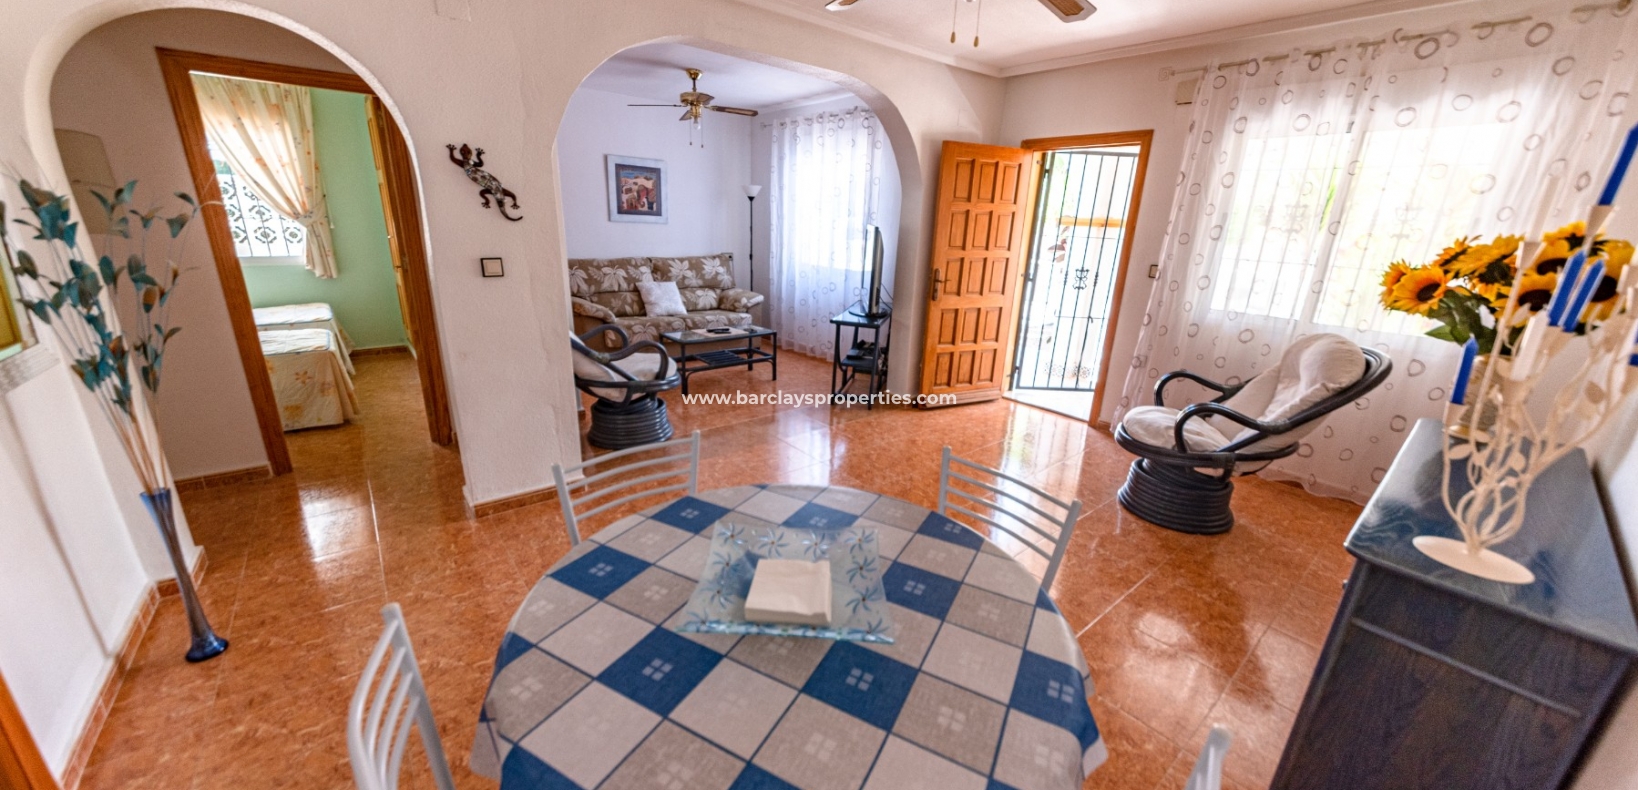 Living Room - Villa For Sale in La Marina with Communal Pool